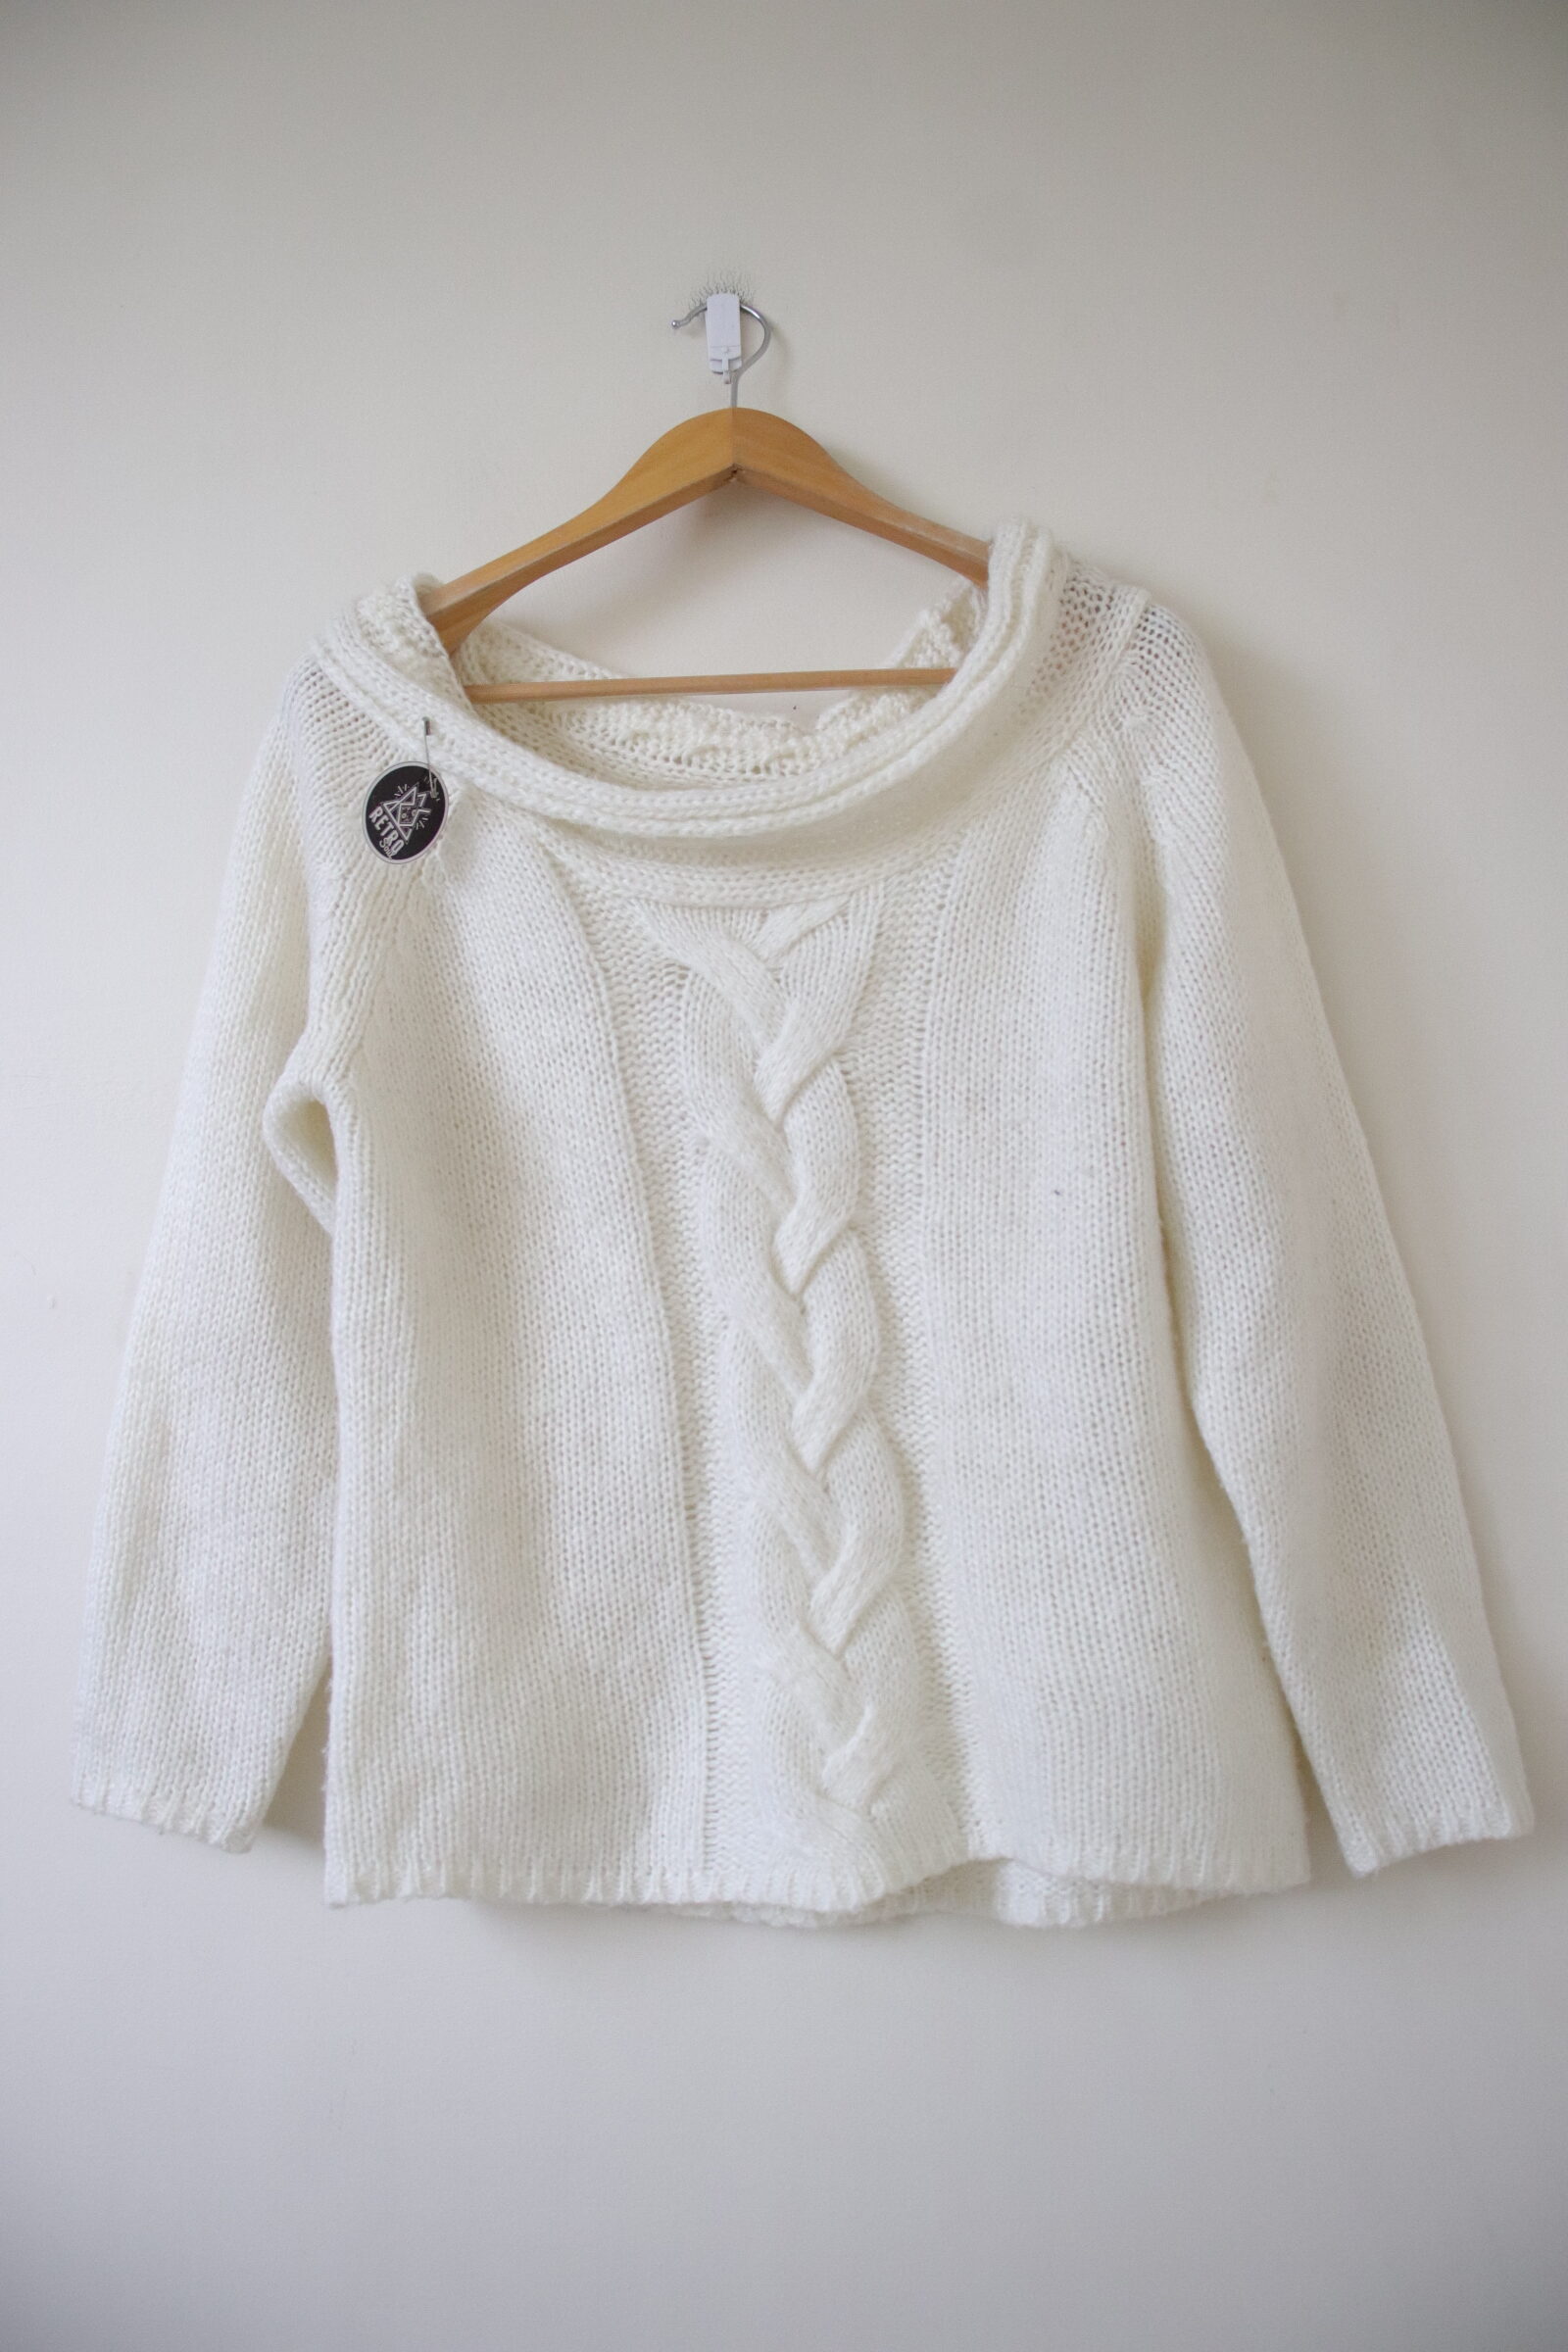 Sweater Offshoulders EE:SOME – Talla S/M